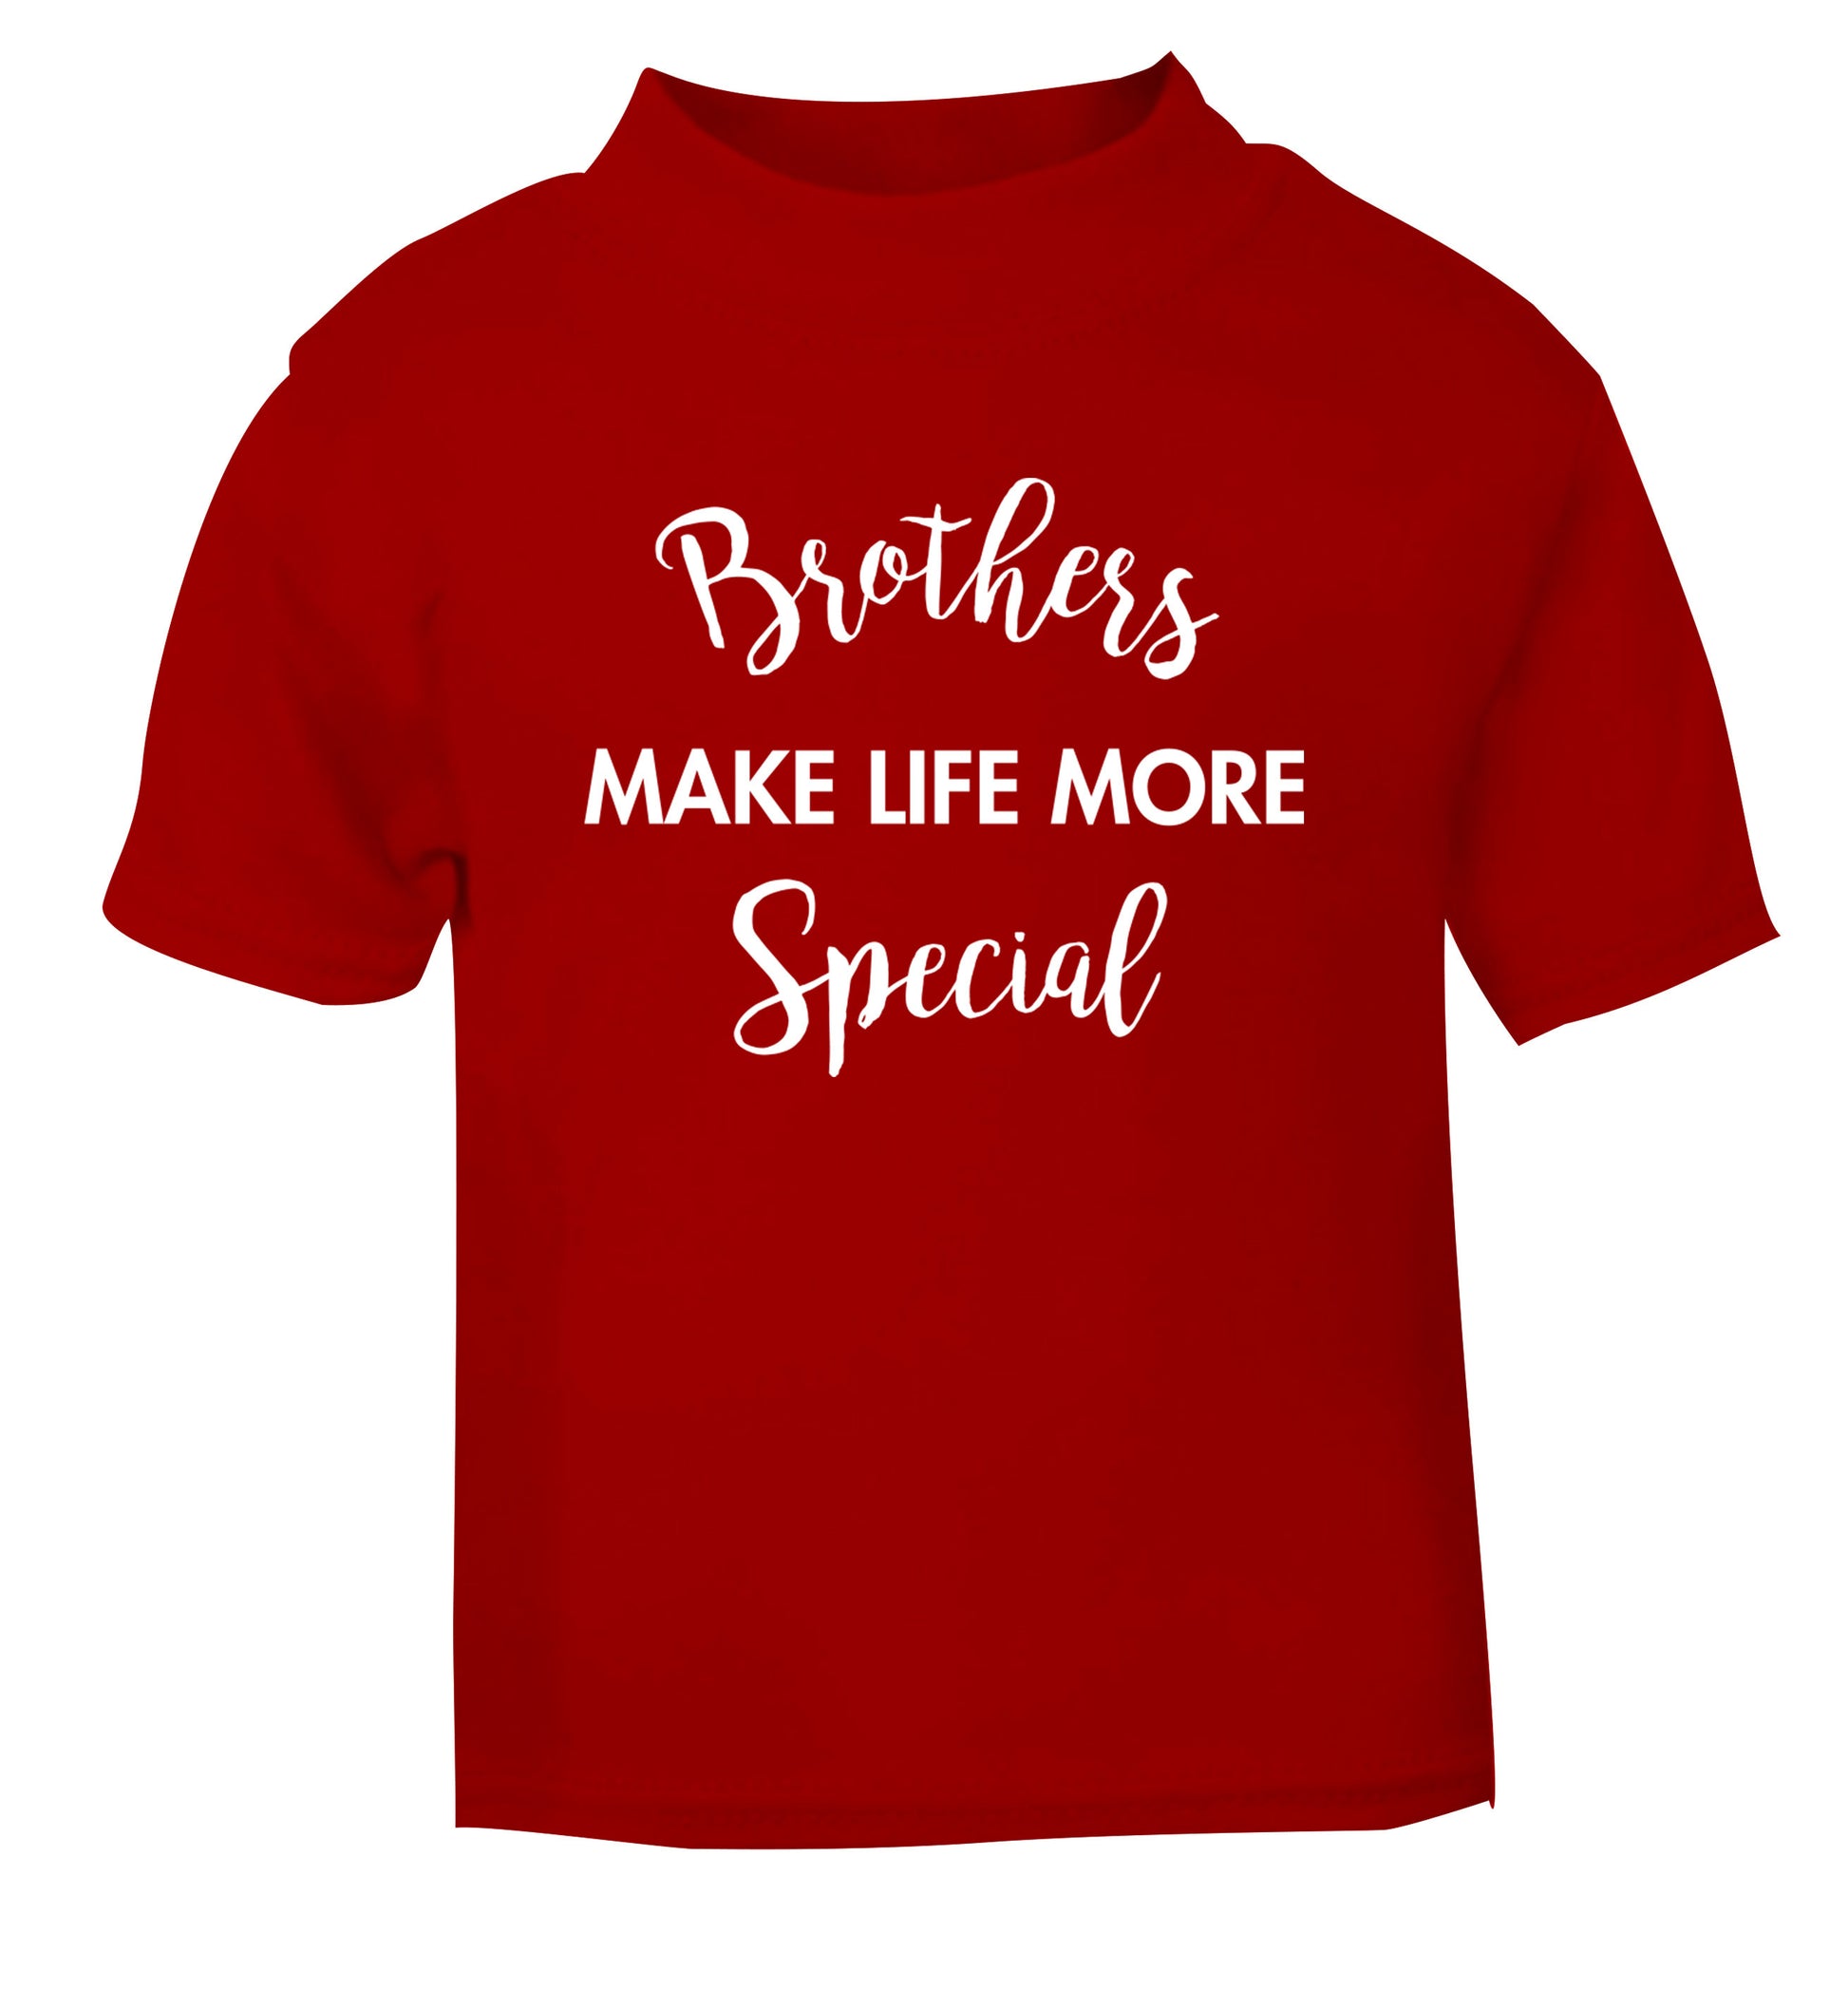 Brothers make life more special red Baby Toddler Tshirt 2 Years